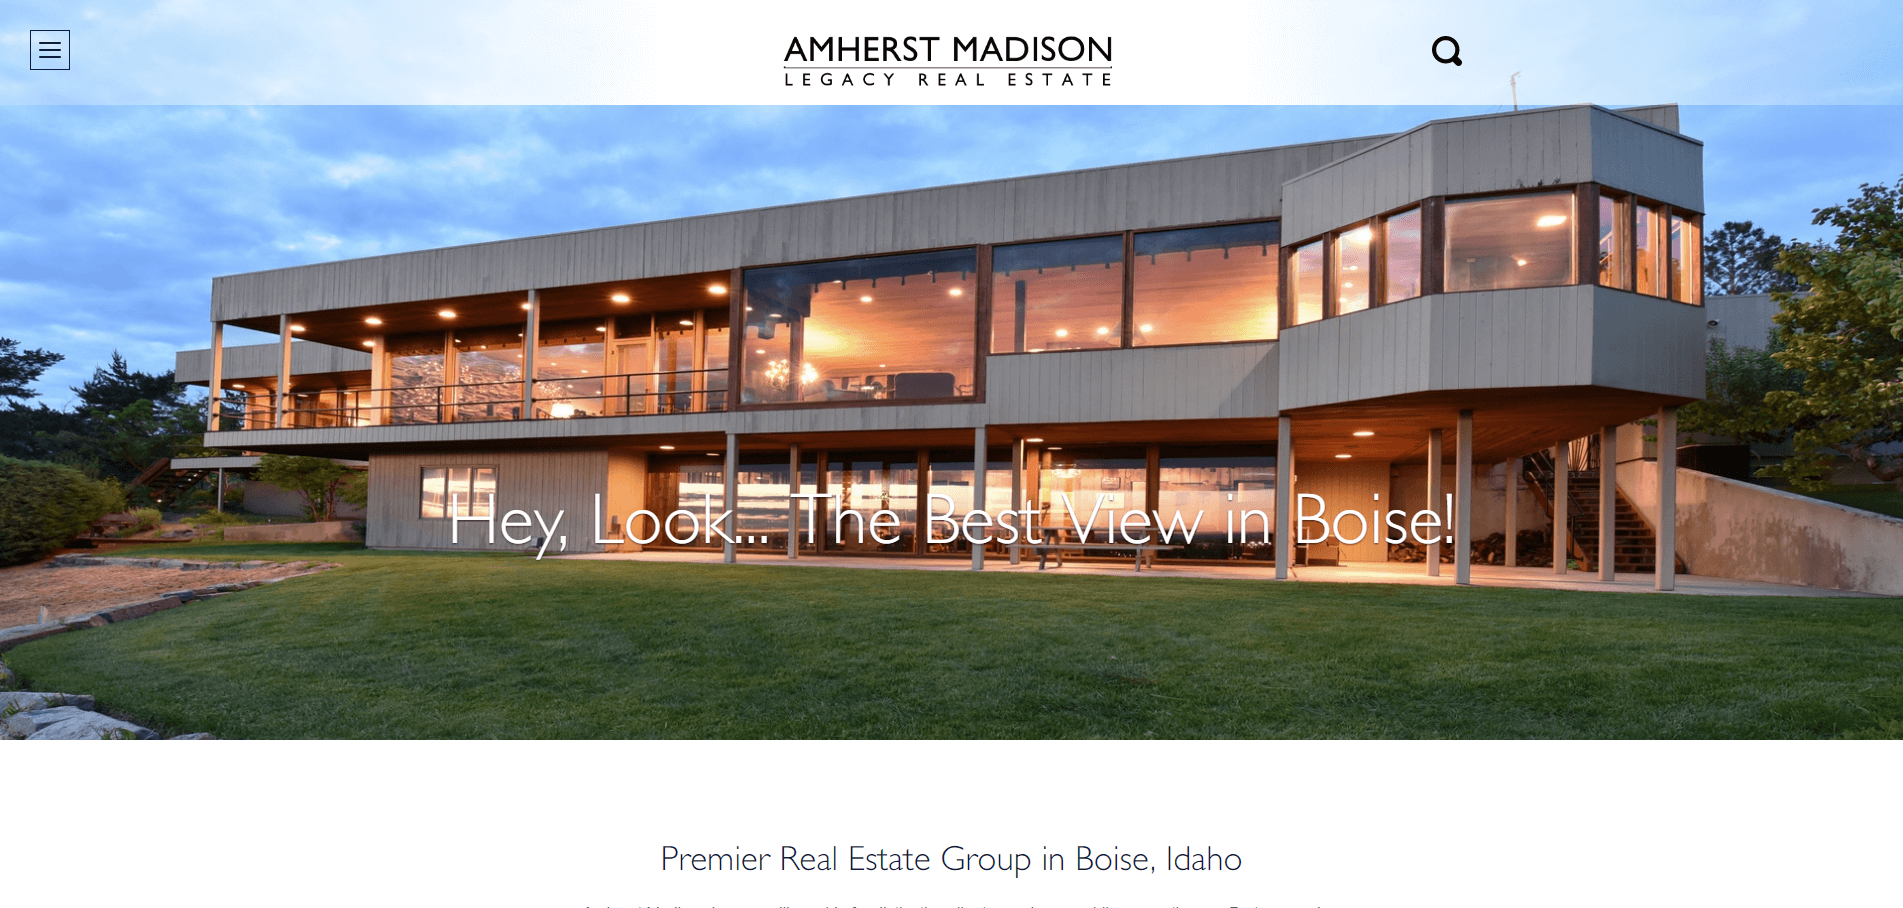  Unbelievable!  Looking for the best real estate websites? Here are 101 of them.  We reviewed each site and ranked them 1-101.  Here's amherstmadisonlegacy.com.  Want to see who made the list? 